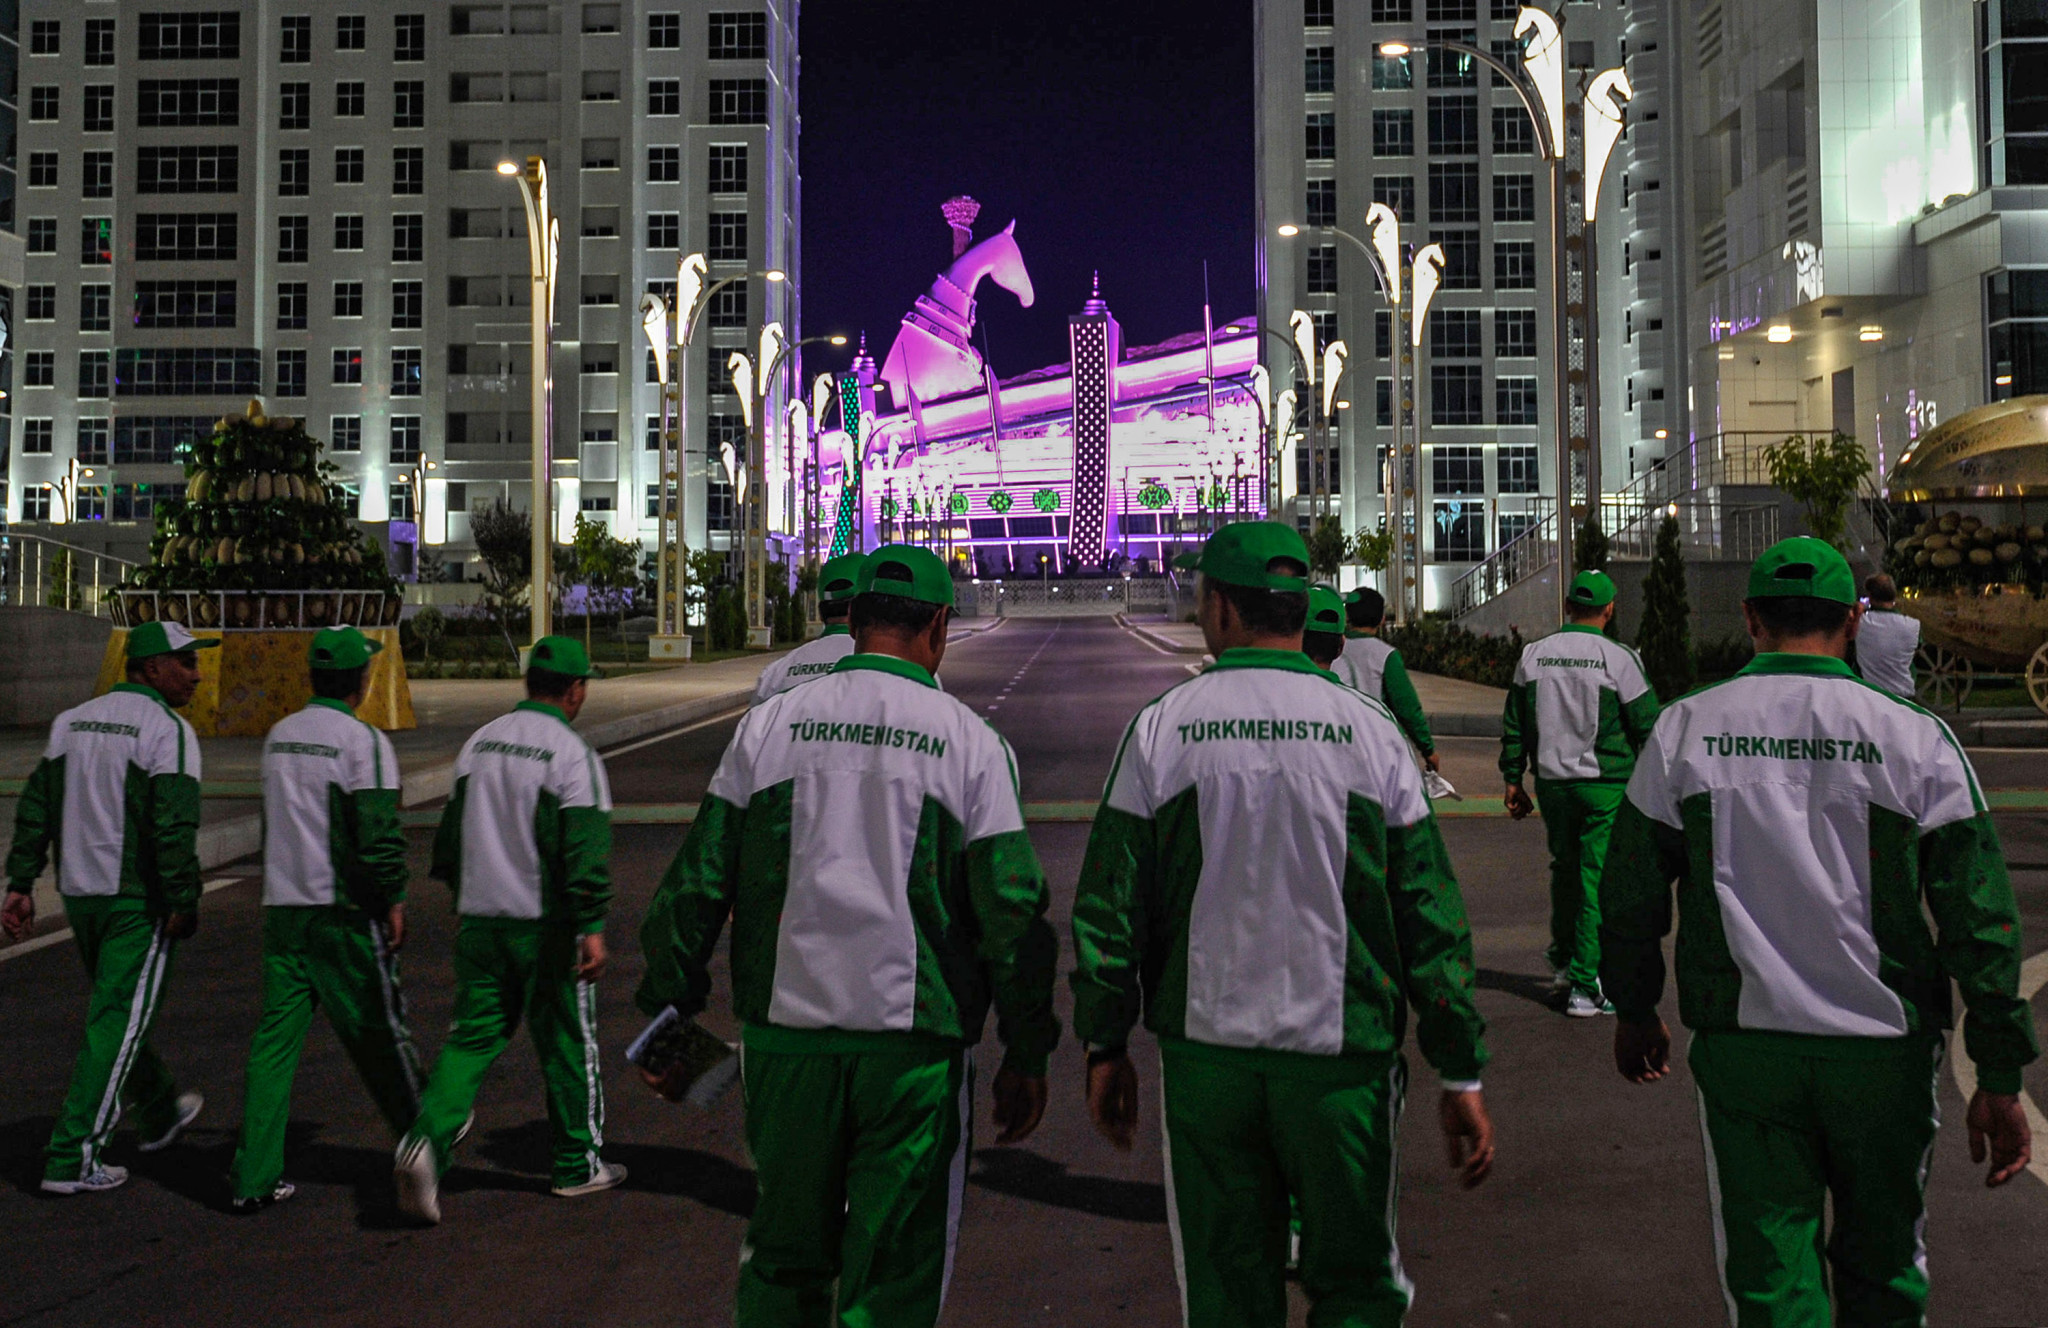 Workers within the Olympic Complex in Ashgabat head towards the Olympic Stadium ©Getty Images